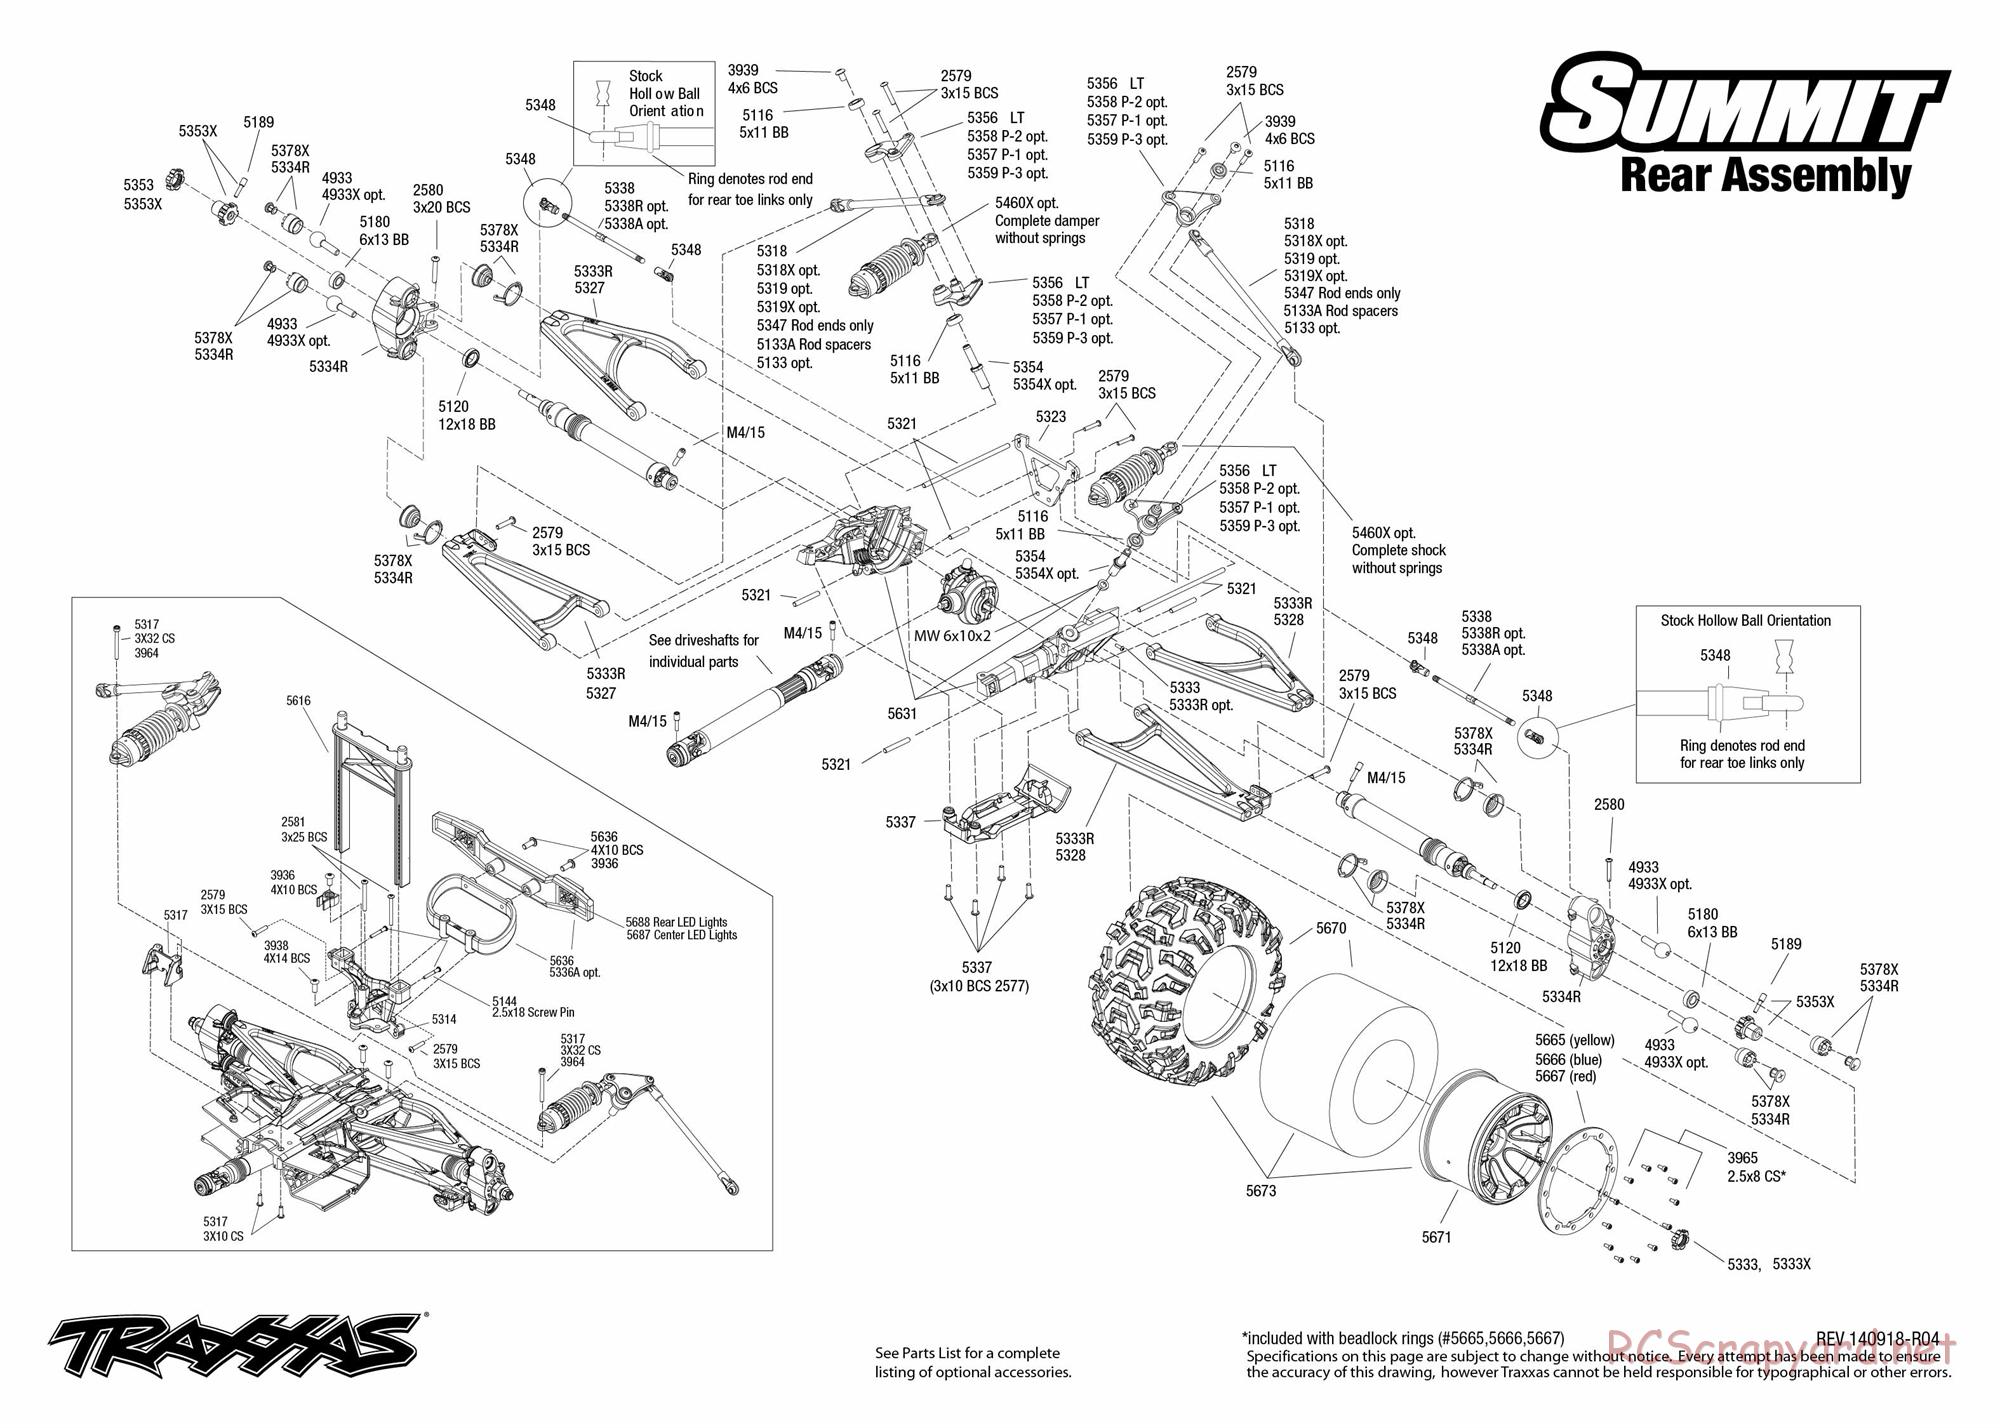 Traxxas - Summit - Exploded Views - Page 6